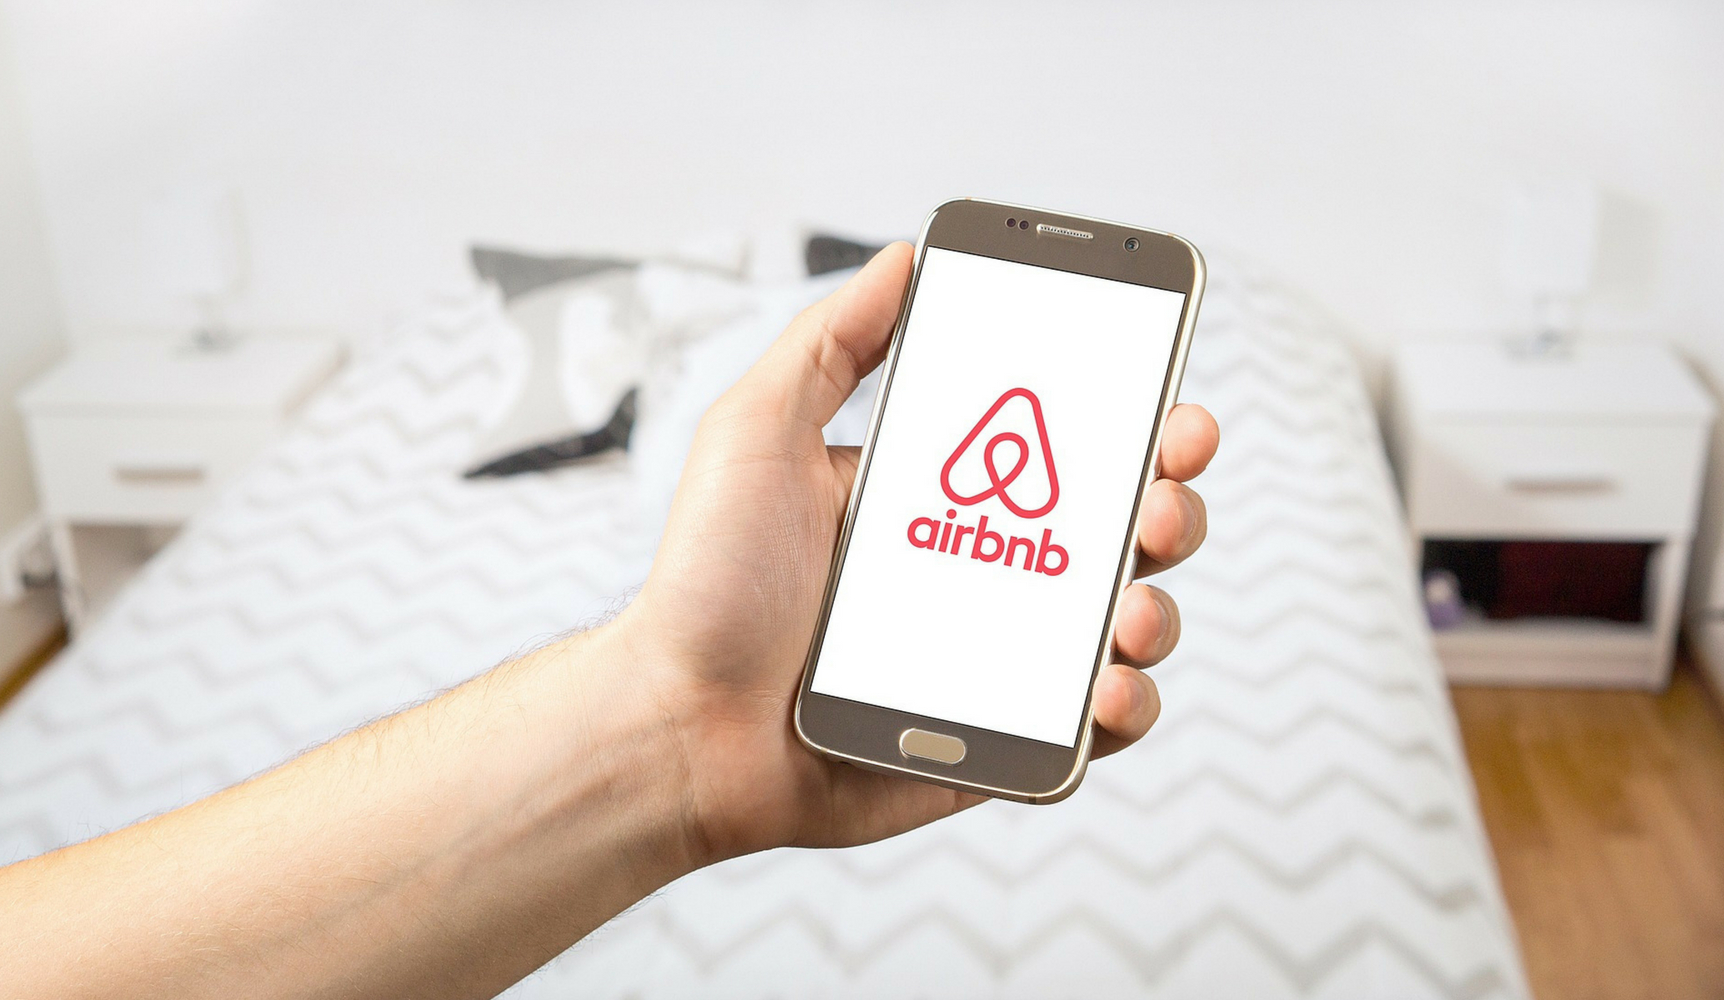 How to Develop an app like Airbnb